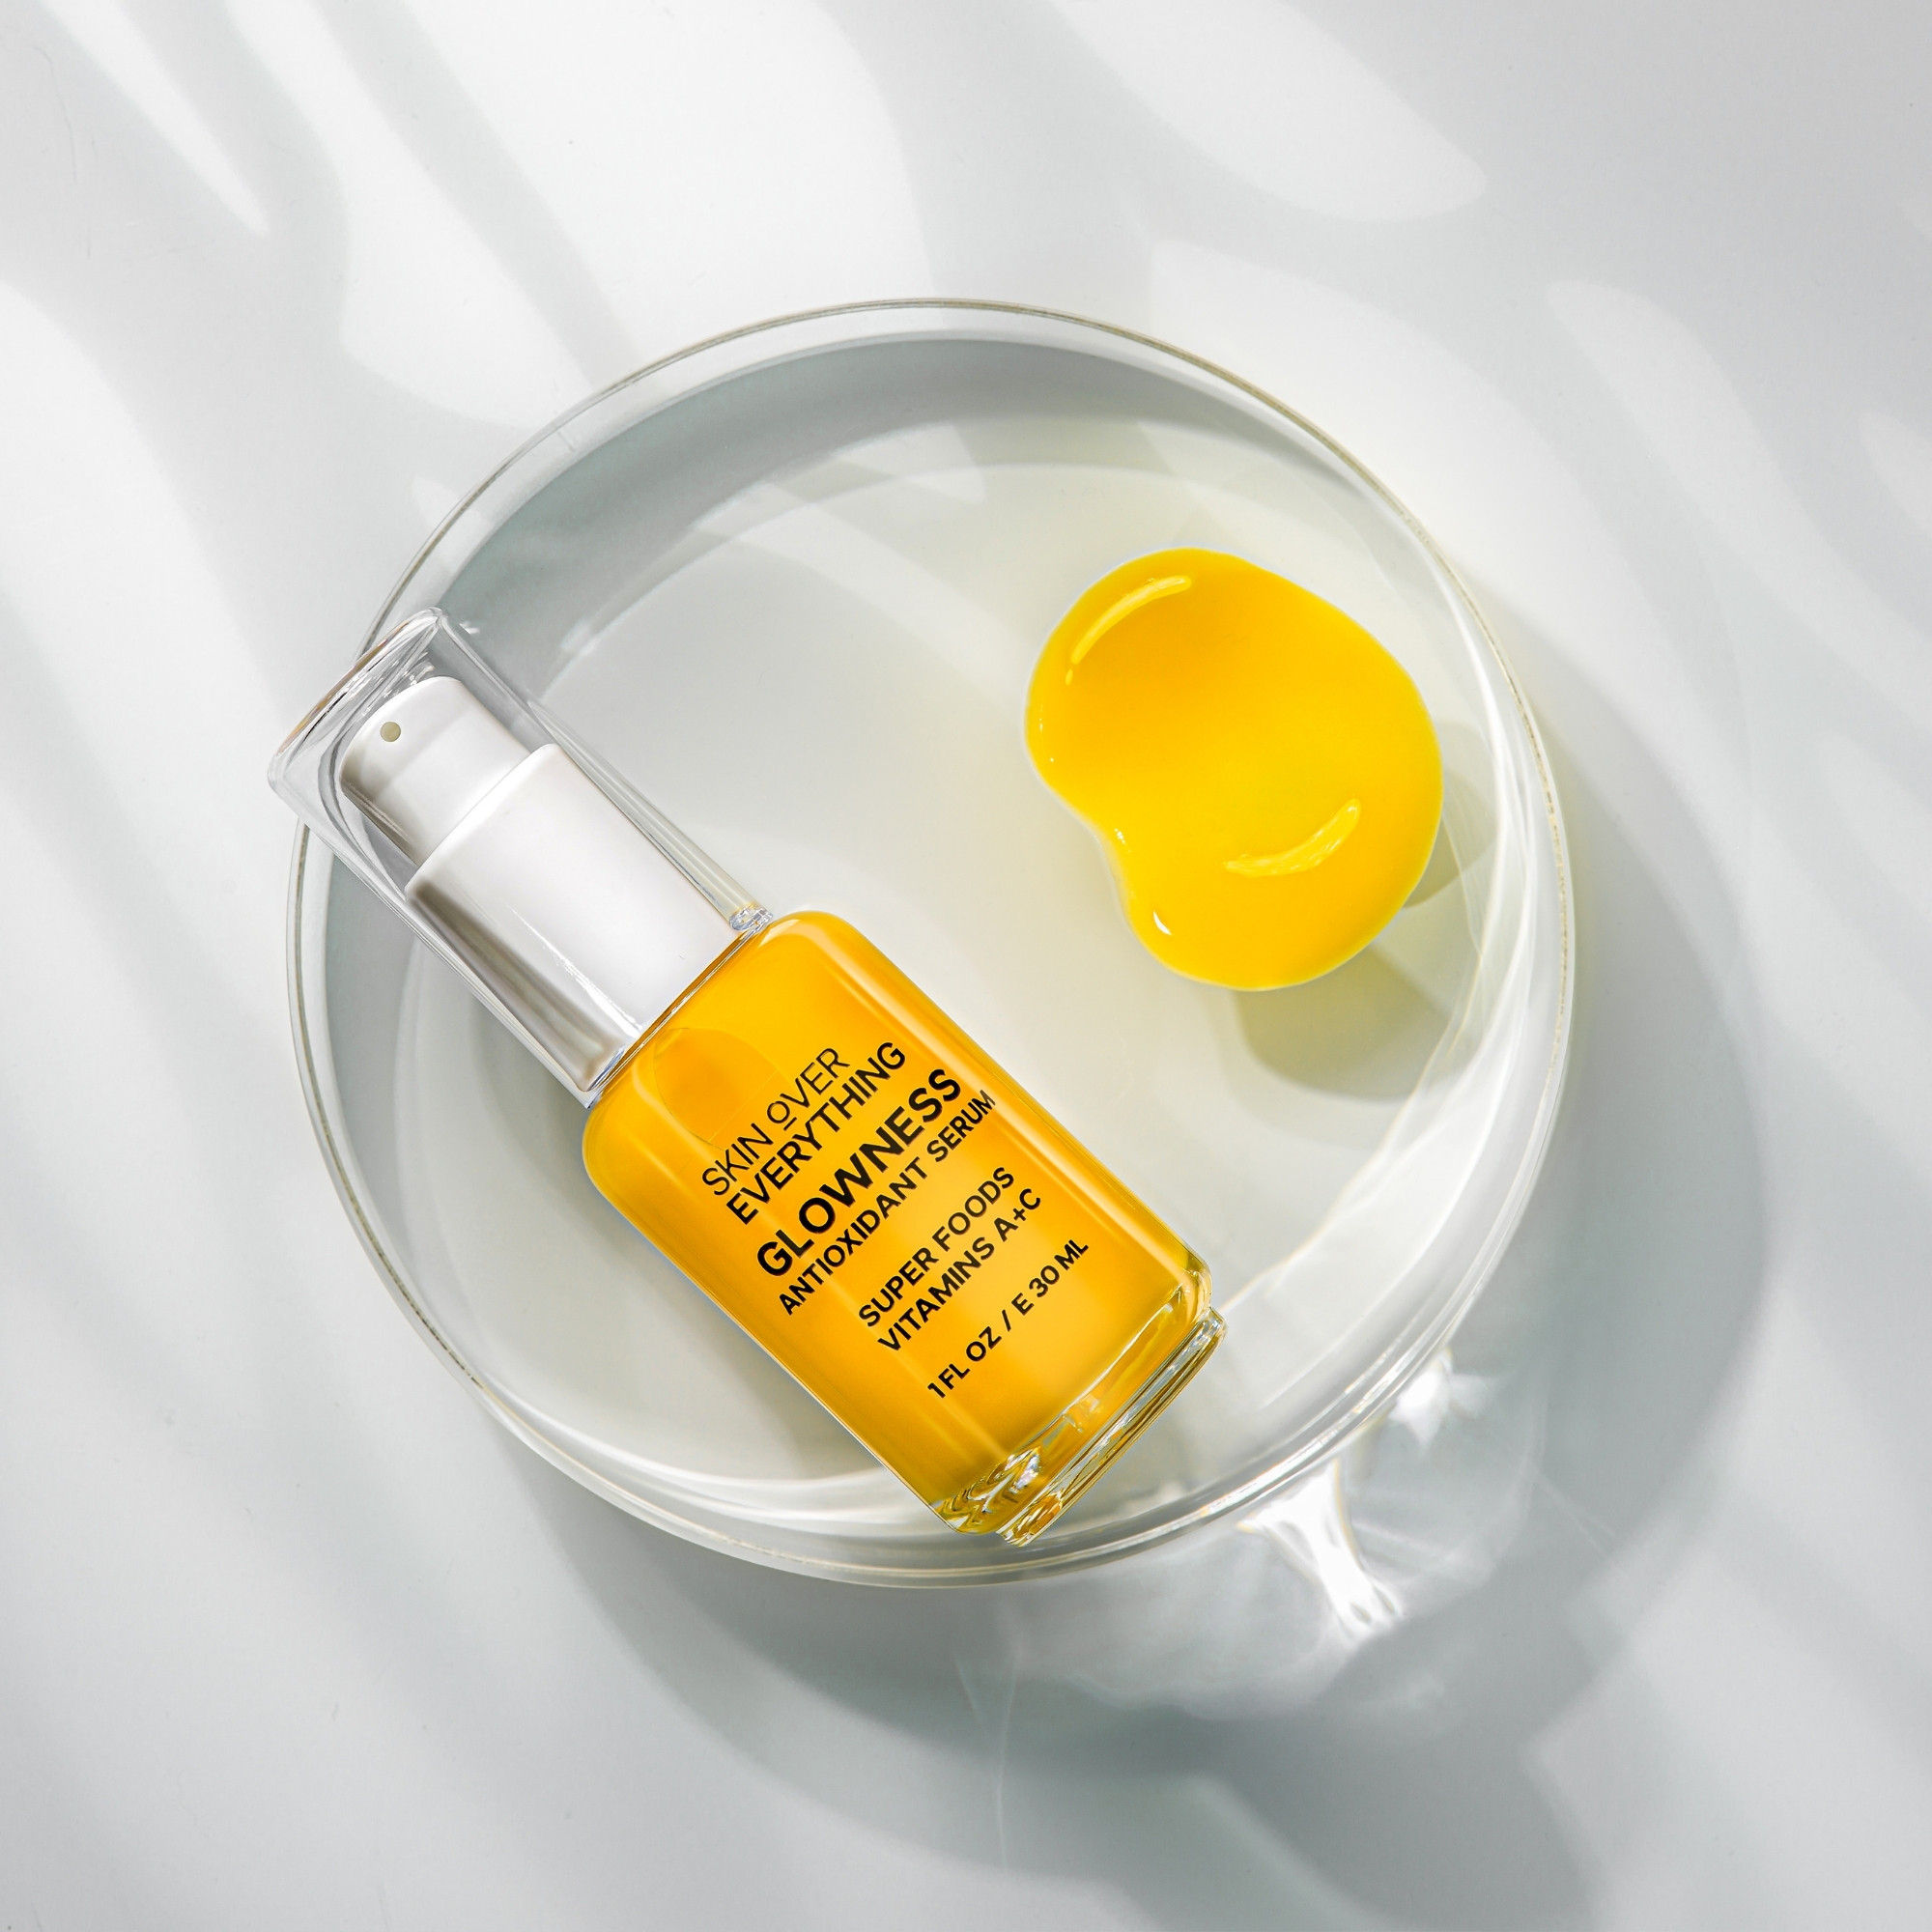 Antioxidant serum with yellow texture swatch placed on round acrylic block and shot using gobo lighting.